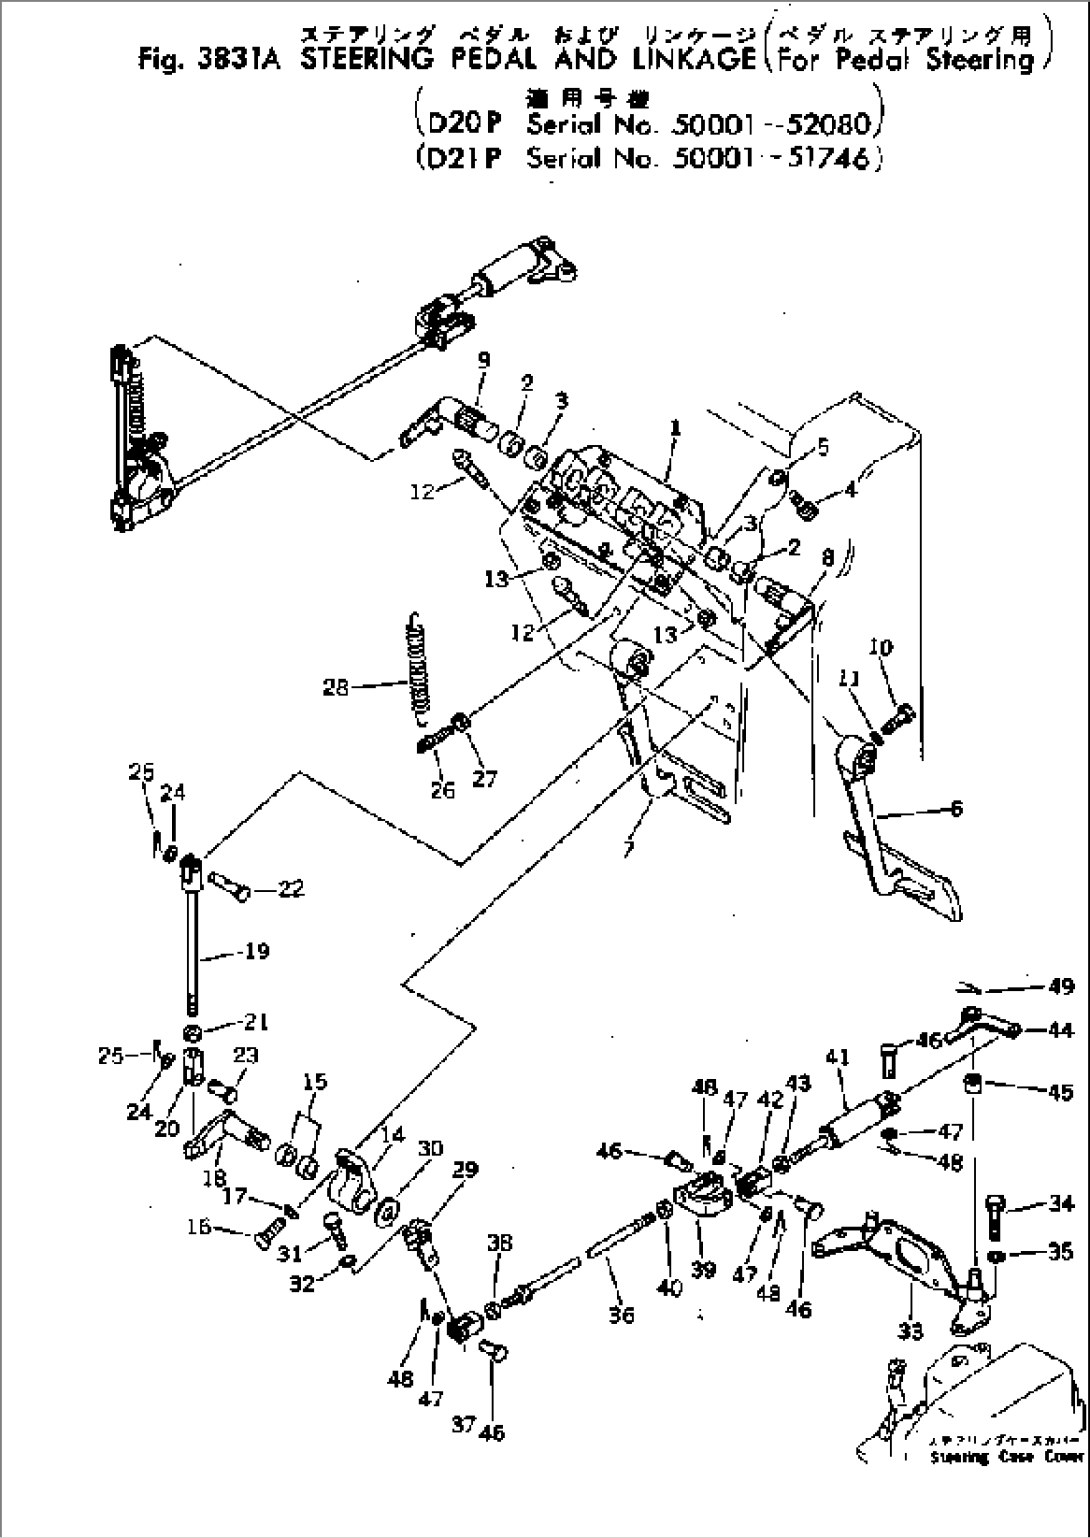 STEERING PEDAL AND LINKAGE (FOR PEDAL STEERING)(#50001-52080)